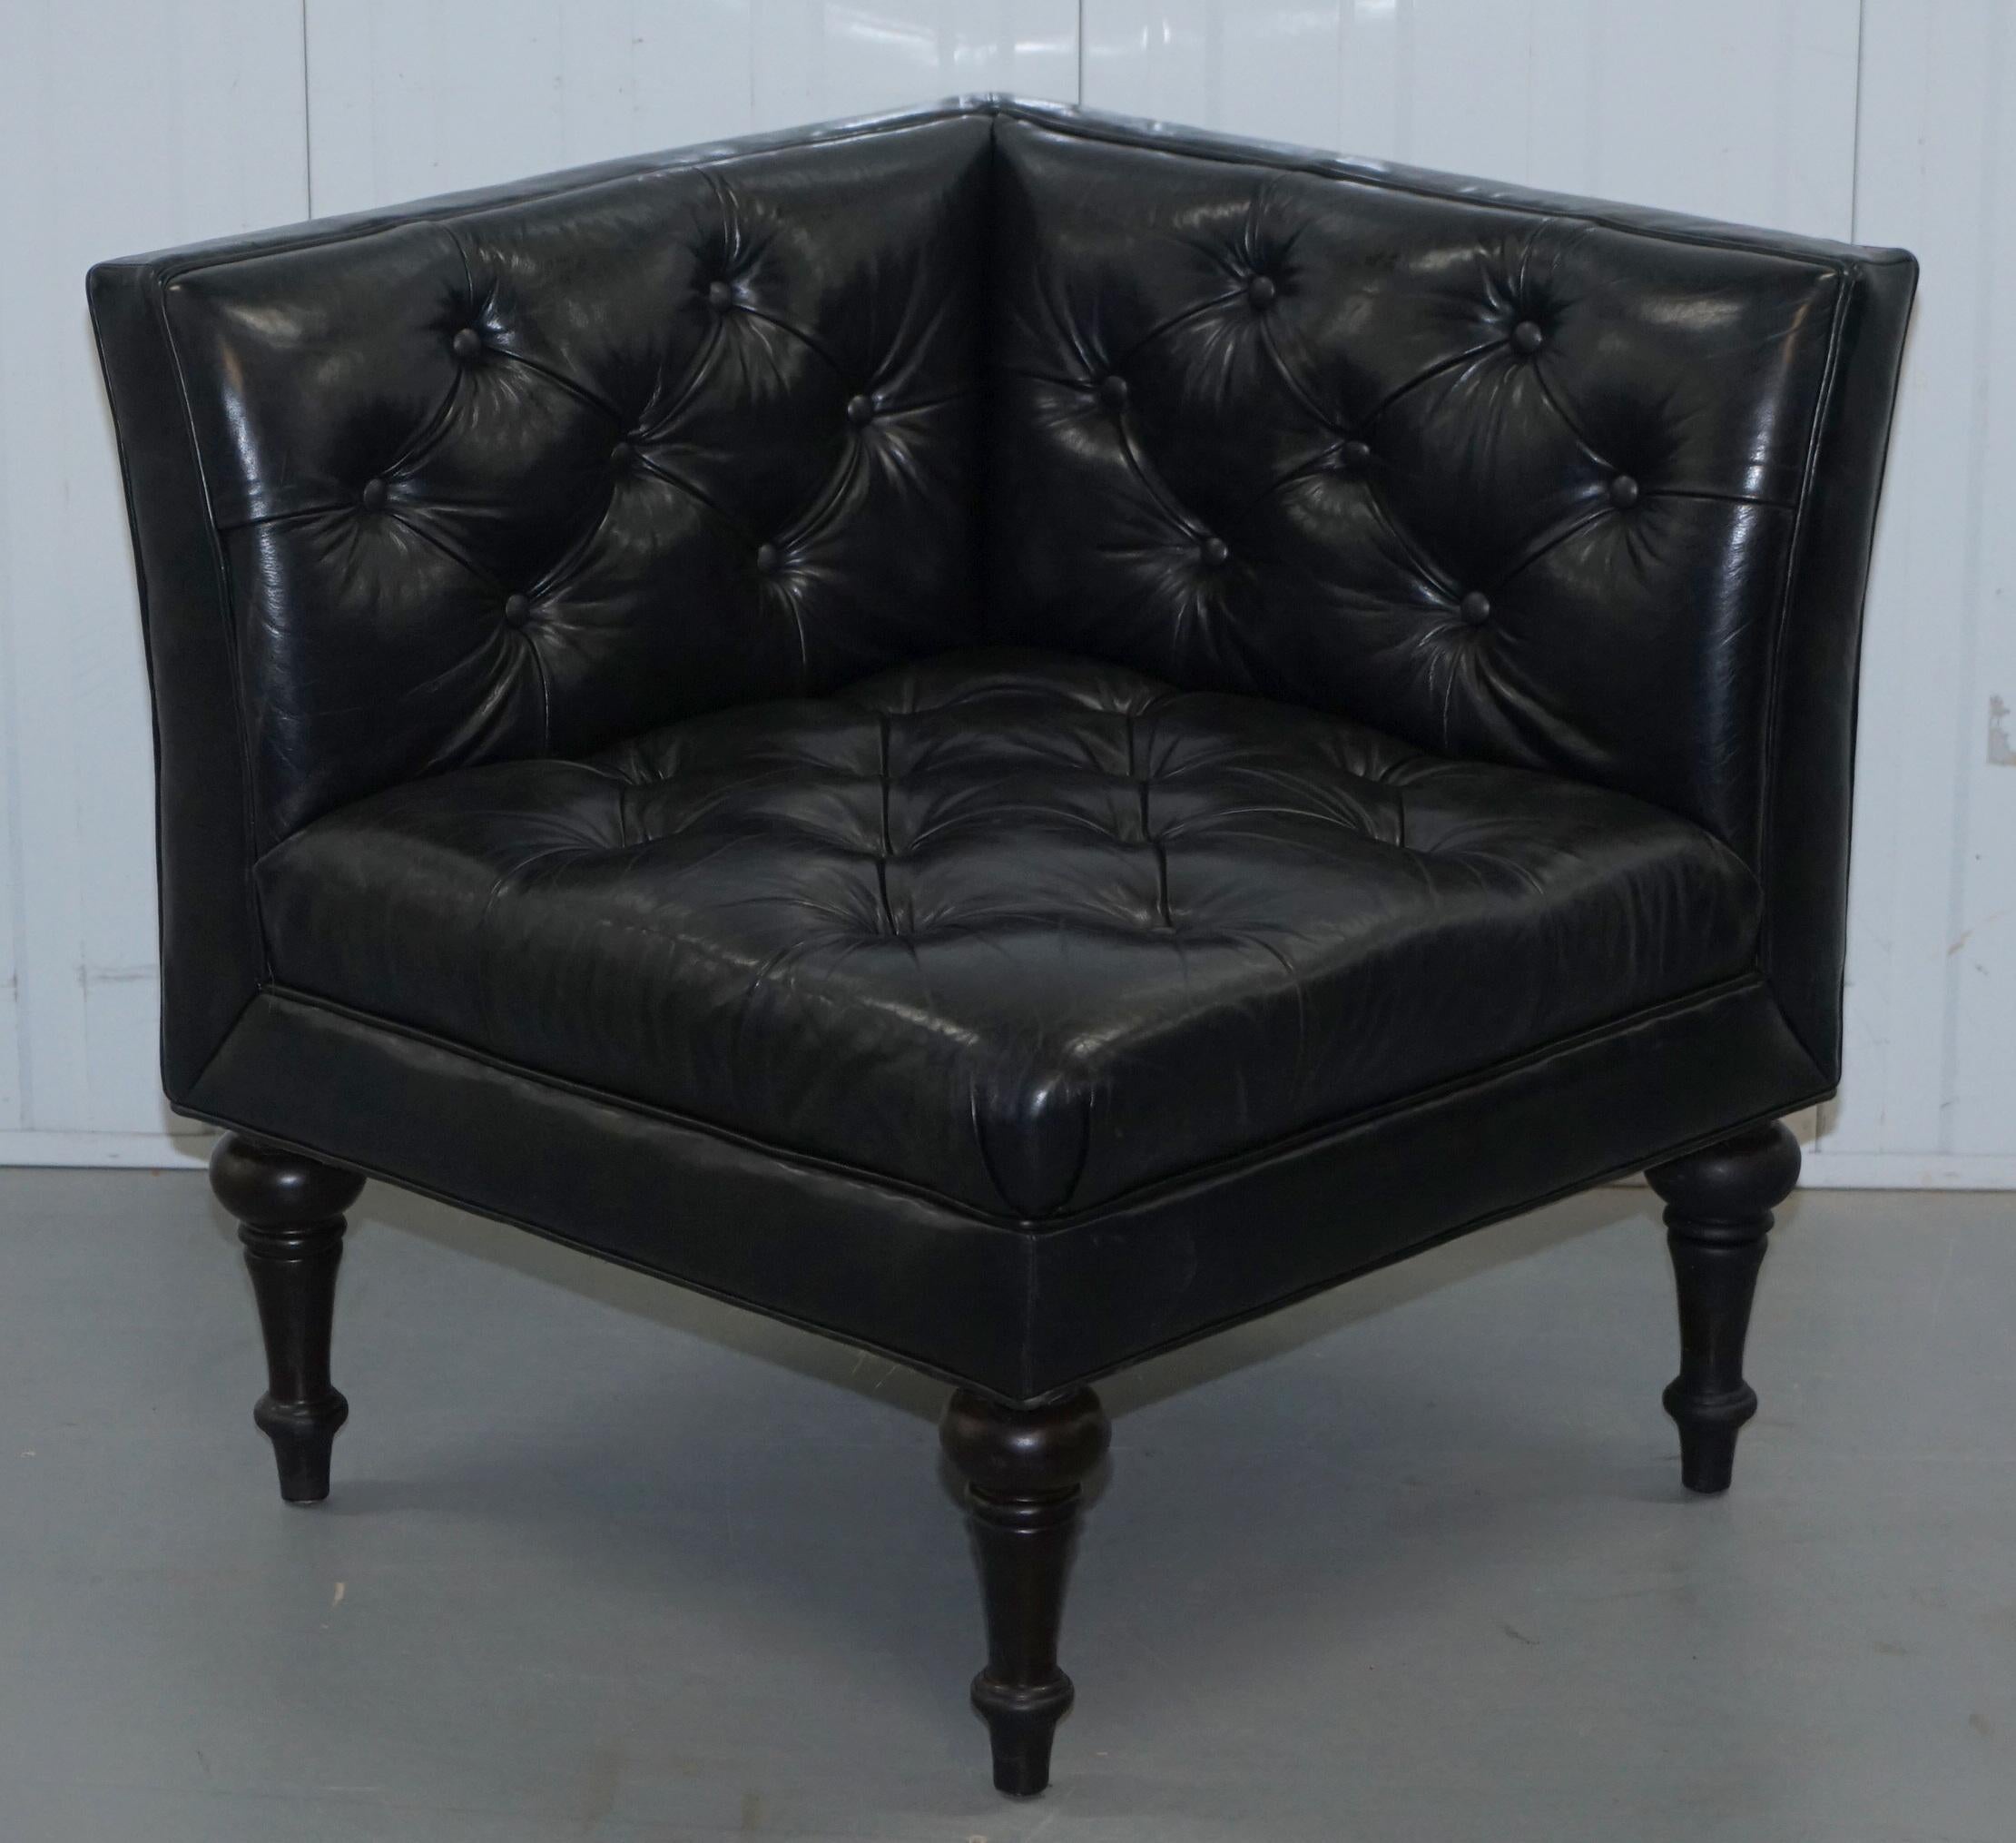 Hand-Crafted X2 Paolo Moschino Nicholas Haslam Leather Chesterfield Salon Armchairs